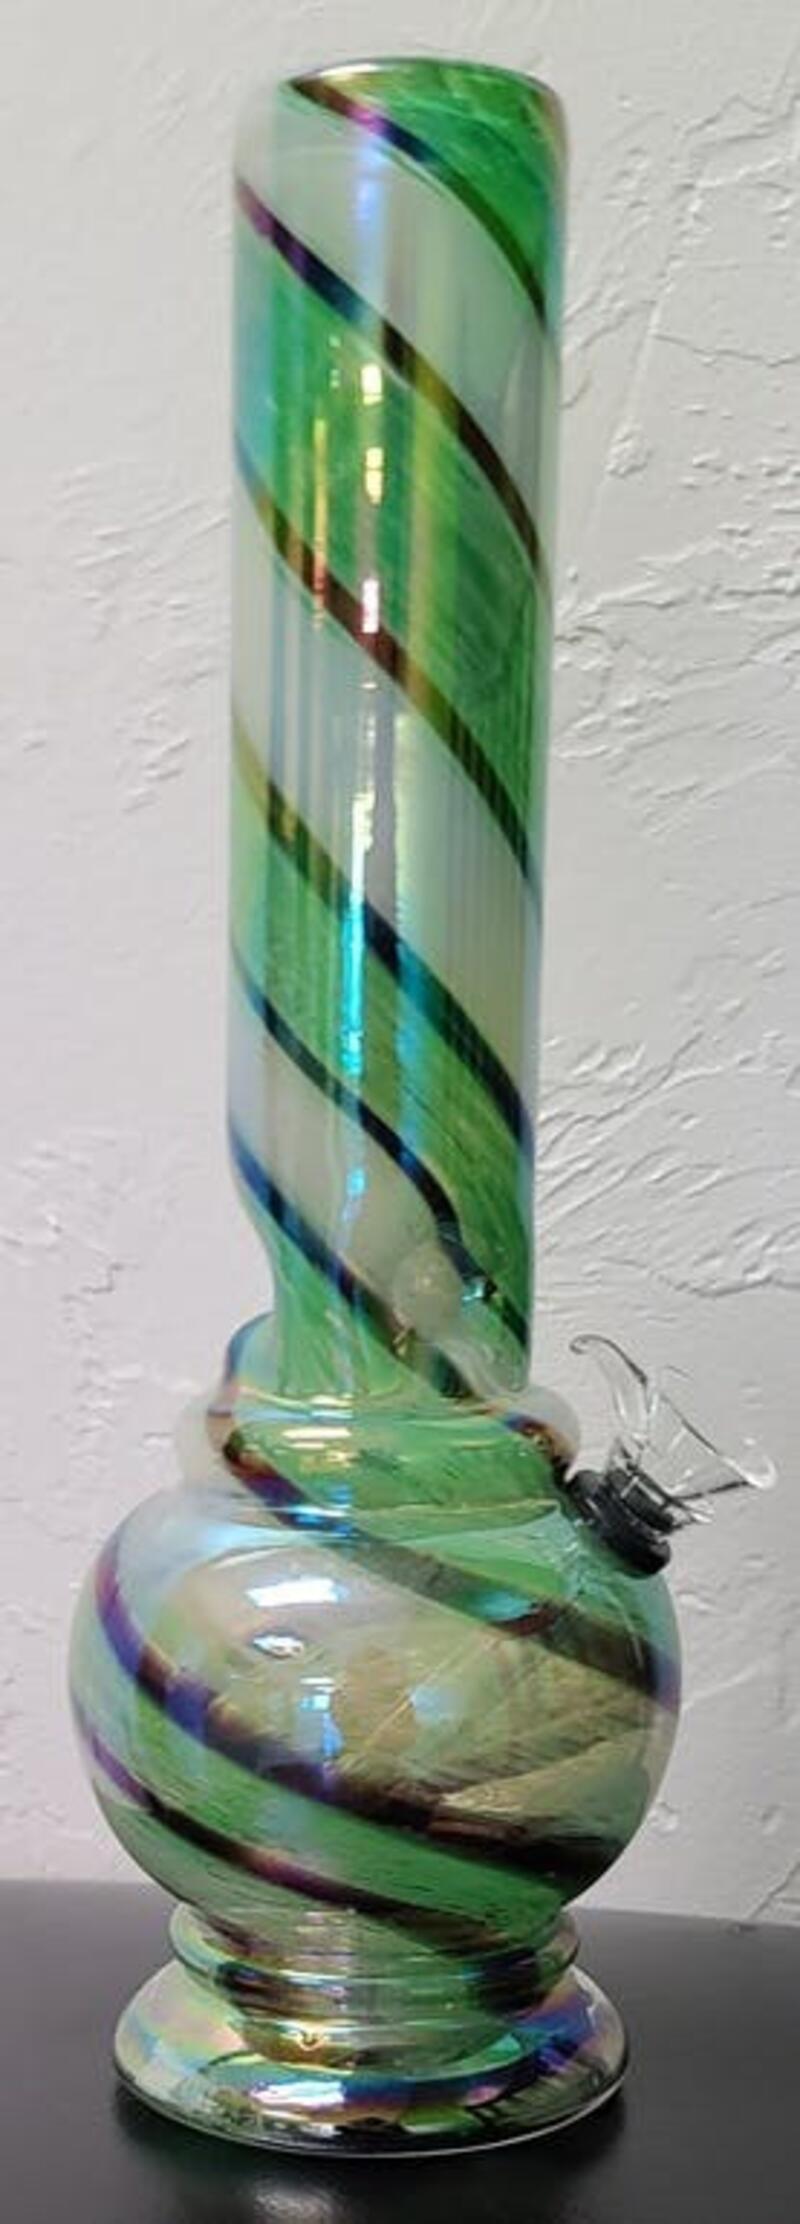 Glass pipe #5